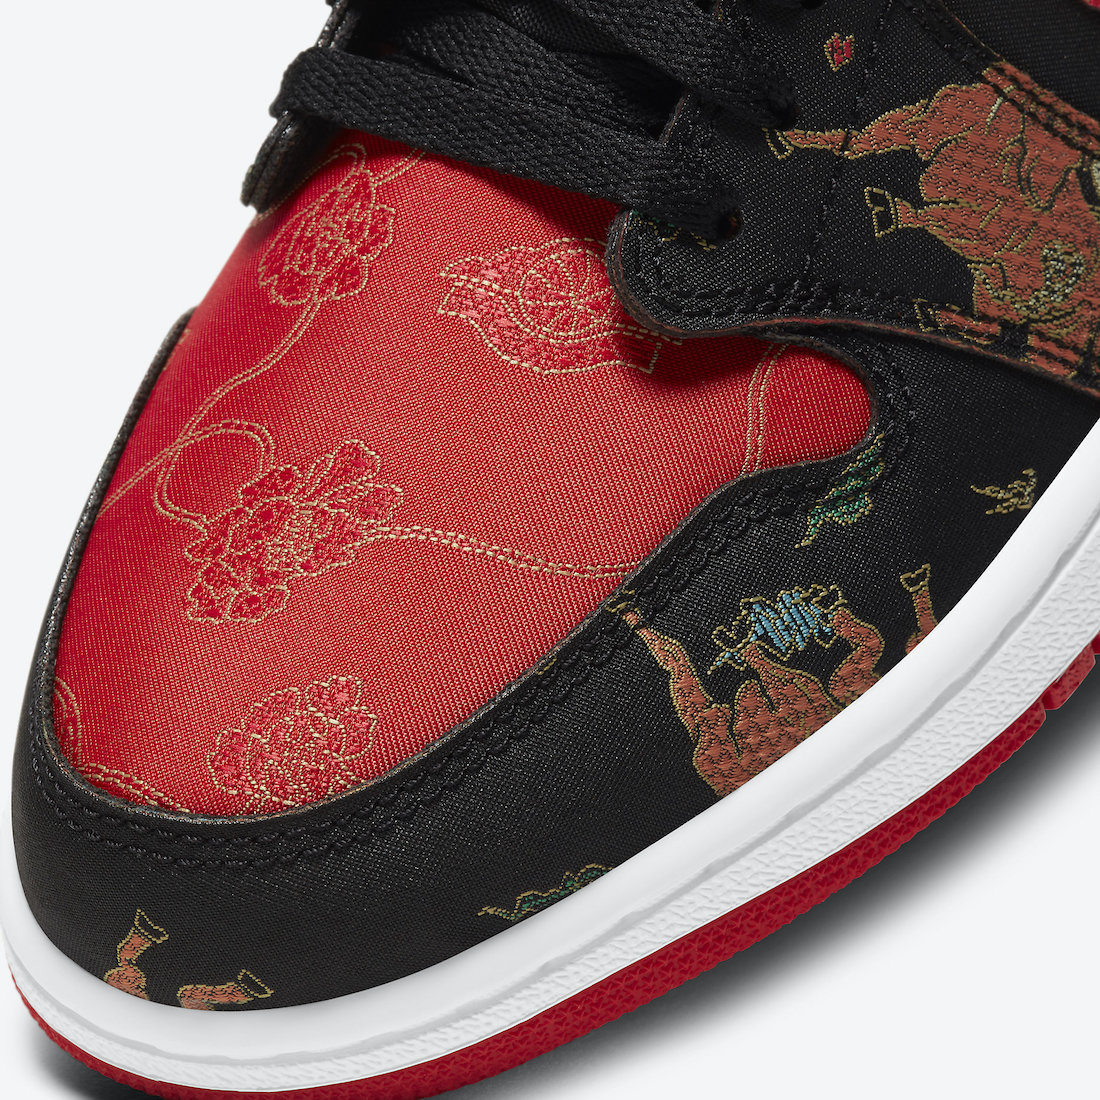 Air-Jordan-1-Low-CNY-Chinese-New-Year-DD2233-001-Release-Date-6